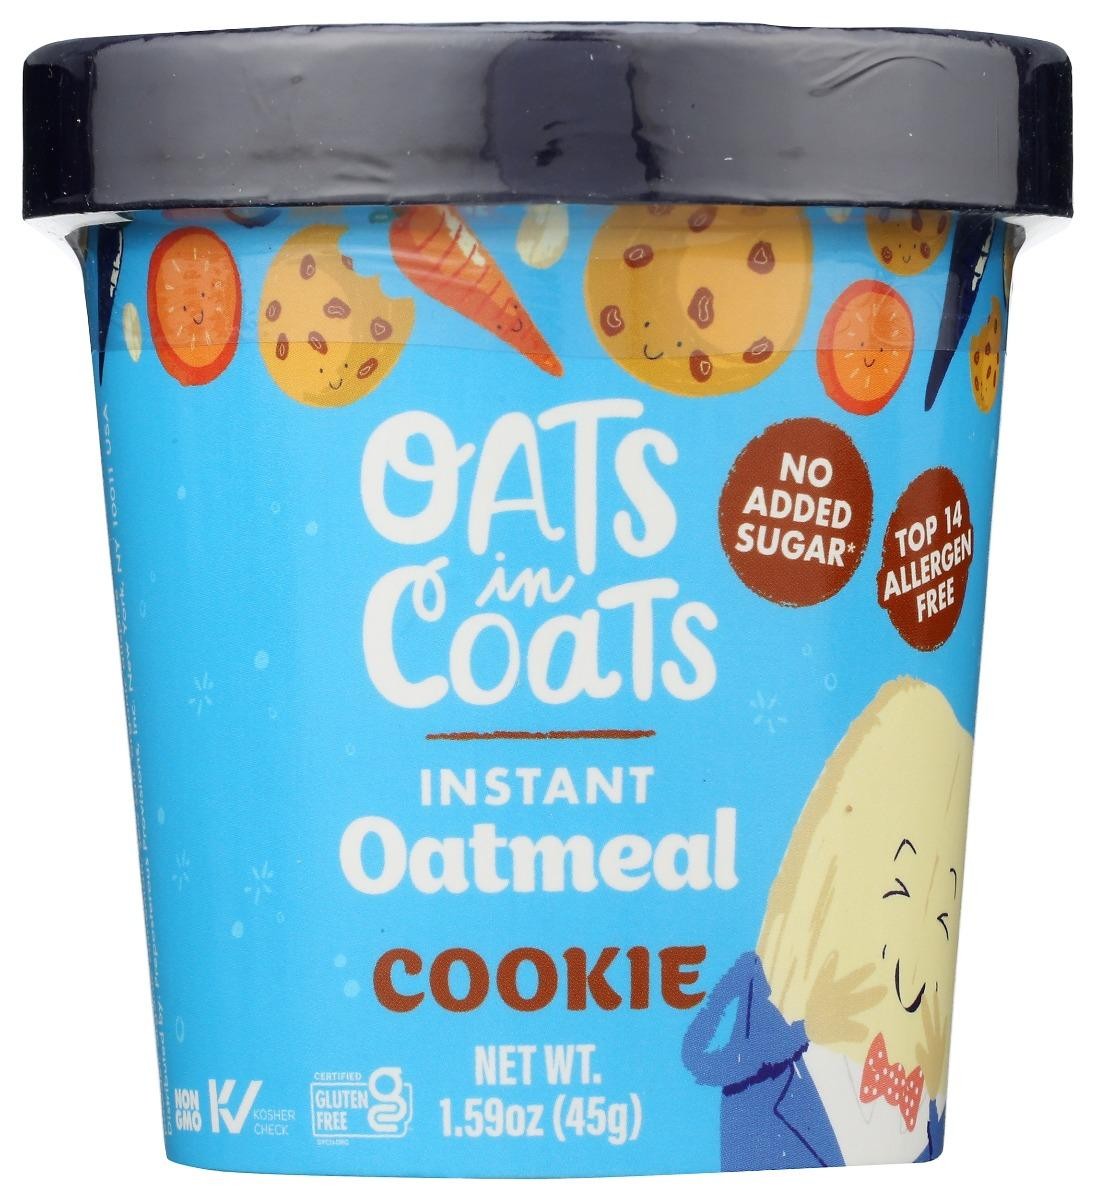 Oats In Coats Gluten Free Instant Oatmeal Cookie Flavor Cup - 1.59 Oz